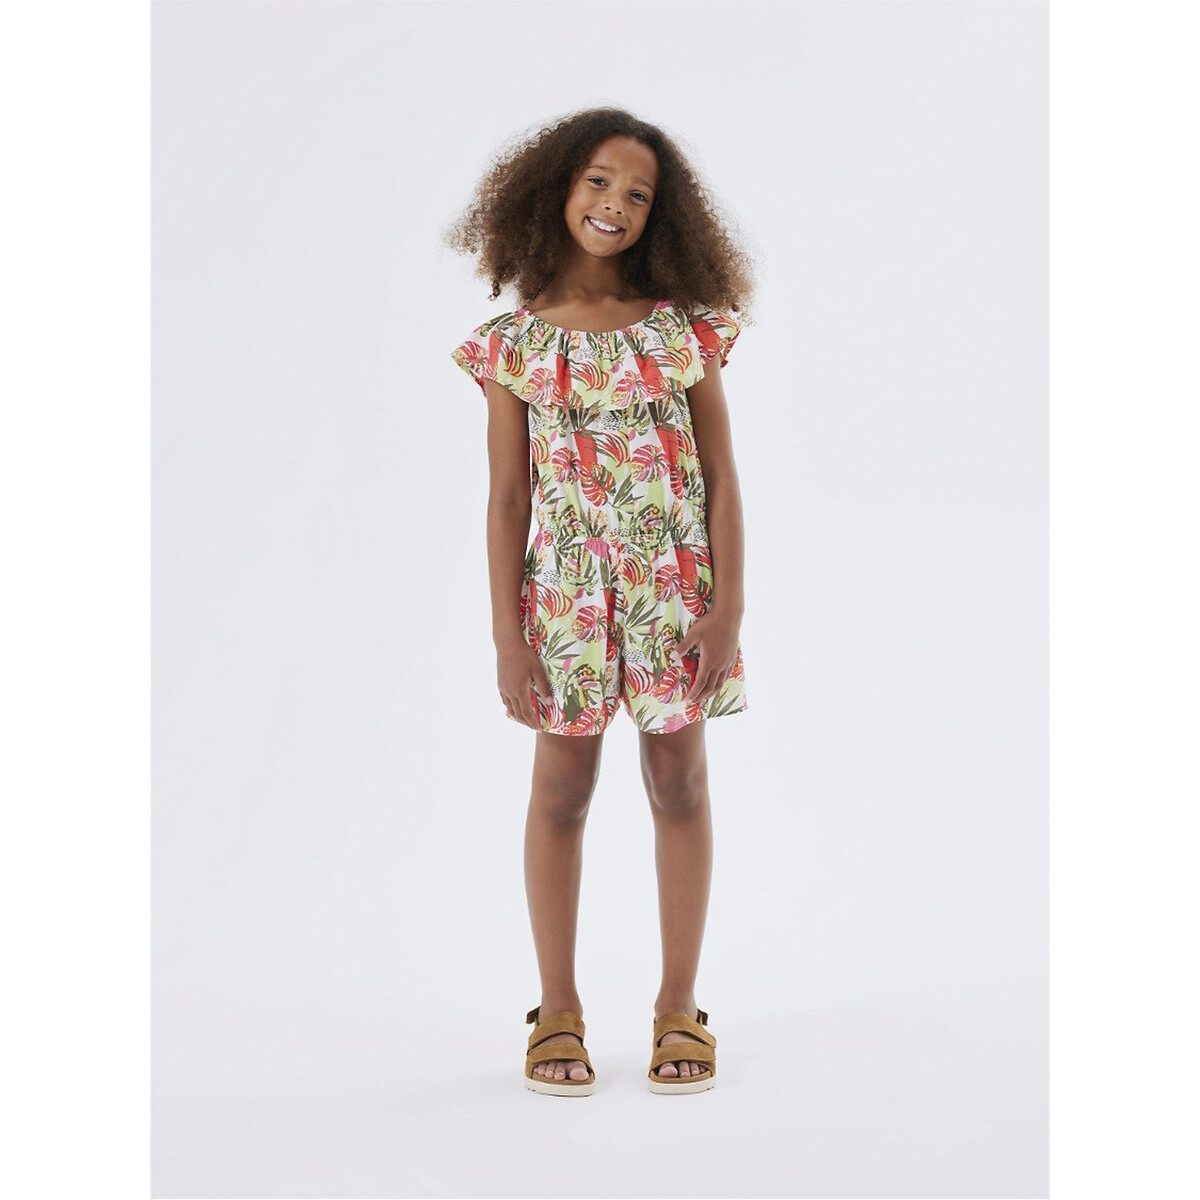 Image of Leaf Print Cotton Dress with Short Sleeves